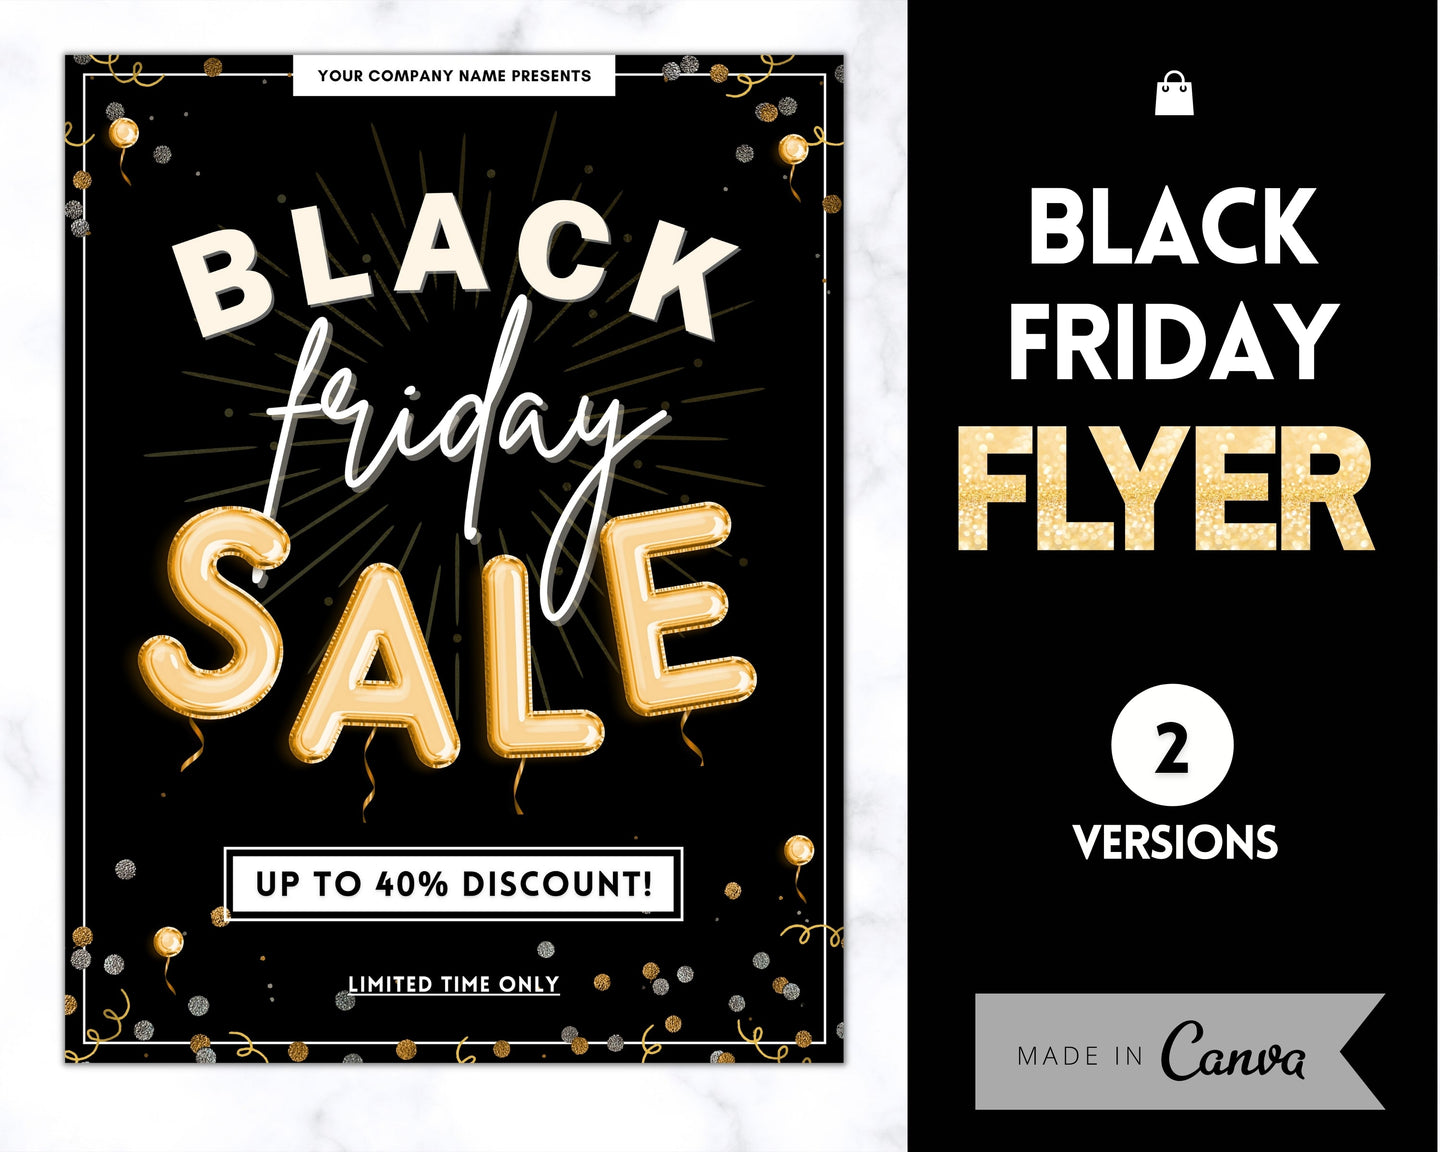 BLACK FRIDAY FLYER Template, Editable Pink Poster, Cyber Monday, Small Business Marketing Branding Template, Christmas Holidays, Flash Sale | Gold